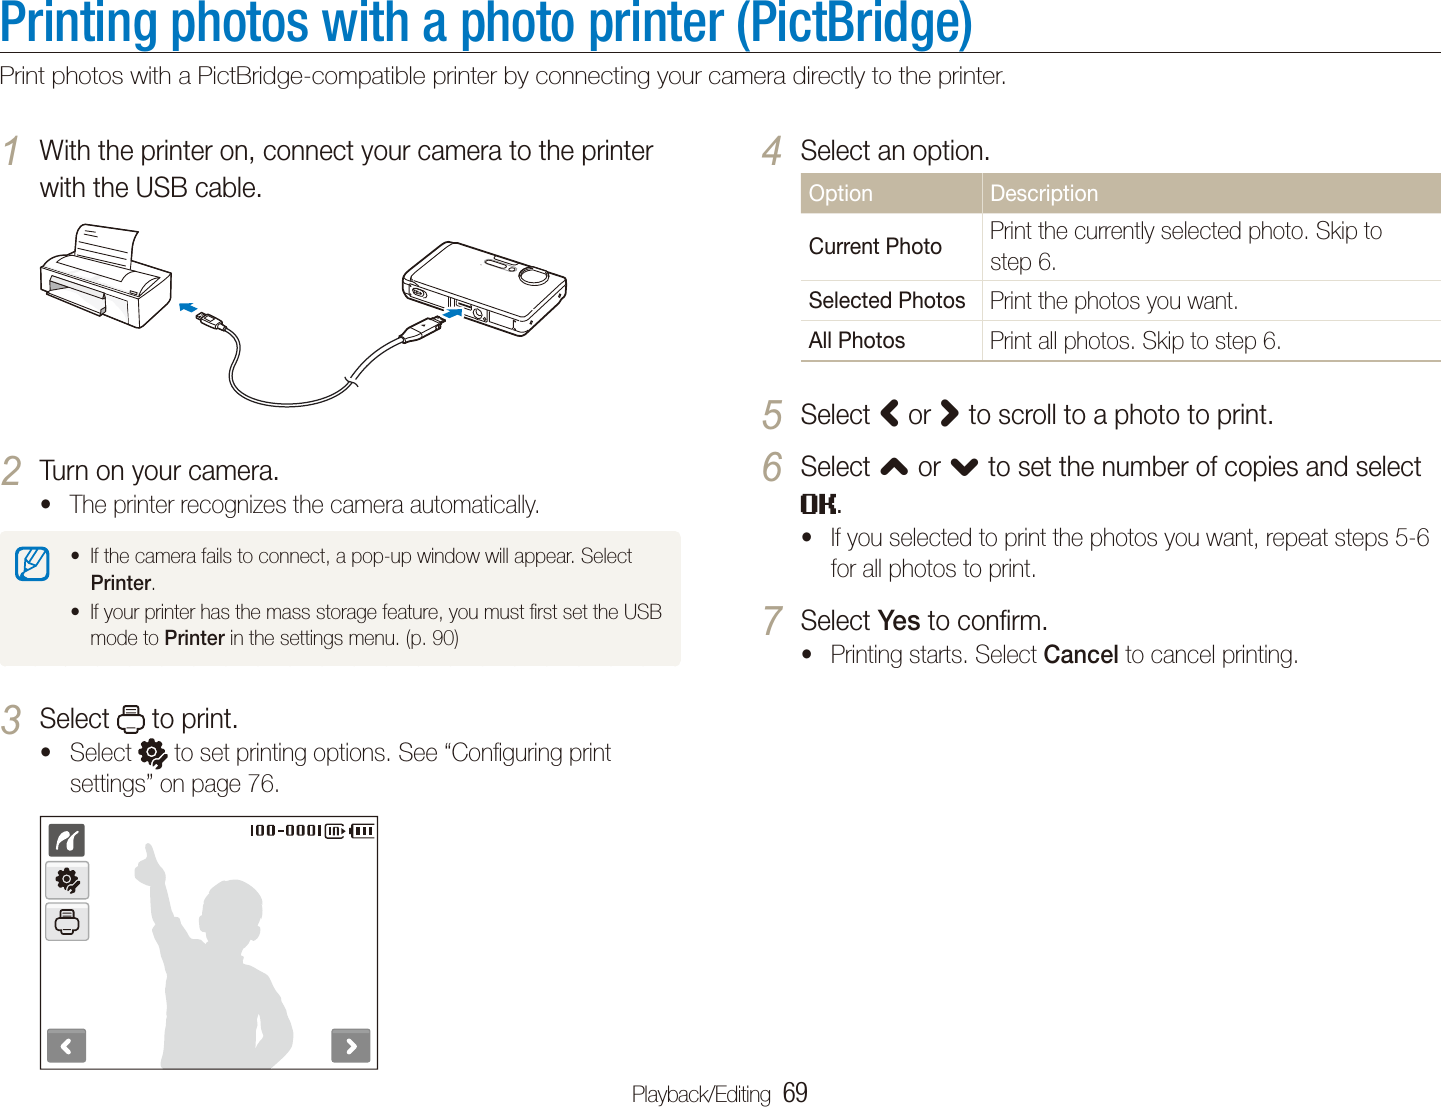 Playback/Editing  69Printing photos with a photo printer (PictBridge)Print photos with a PictBridge-compatible printer by connecting your camera directly to the printer.Select an option.4 Option DescriptionCurrent PhotoPrint the currently selected photo. Skip to step 6.Selected PhotosPrint the photos you want.All PhotosPrint all photos. Skip to step 6.Select 5 &lt; or &gt; to scroll to a photo to print.Select 6 , or . to set the number of copies and select .If you selected to print the photos you want, repeat steps 5-6 tfor all photos to print.Select 7 Yes to conﬁrm.Printing starts. Select t Cancel to cancel printing.With the printer on, connect your camera to the printer 1 with the USB cable.Turn on your camera.2 The printer recognizes the camera automatically.tIf the camera fails to connect, a pop-up window will appear. Select tPrinter.If your printer has the mass storage feature, you must ﬁrst set the USB tmode to Printer in the settings menu. (p. 90)Select 3  to print.Select t  to set printing options. See “Conﬁguring print settings” on page 76.